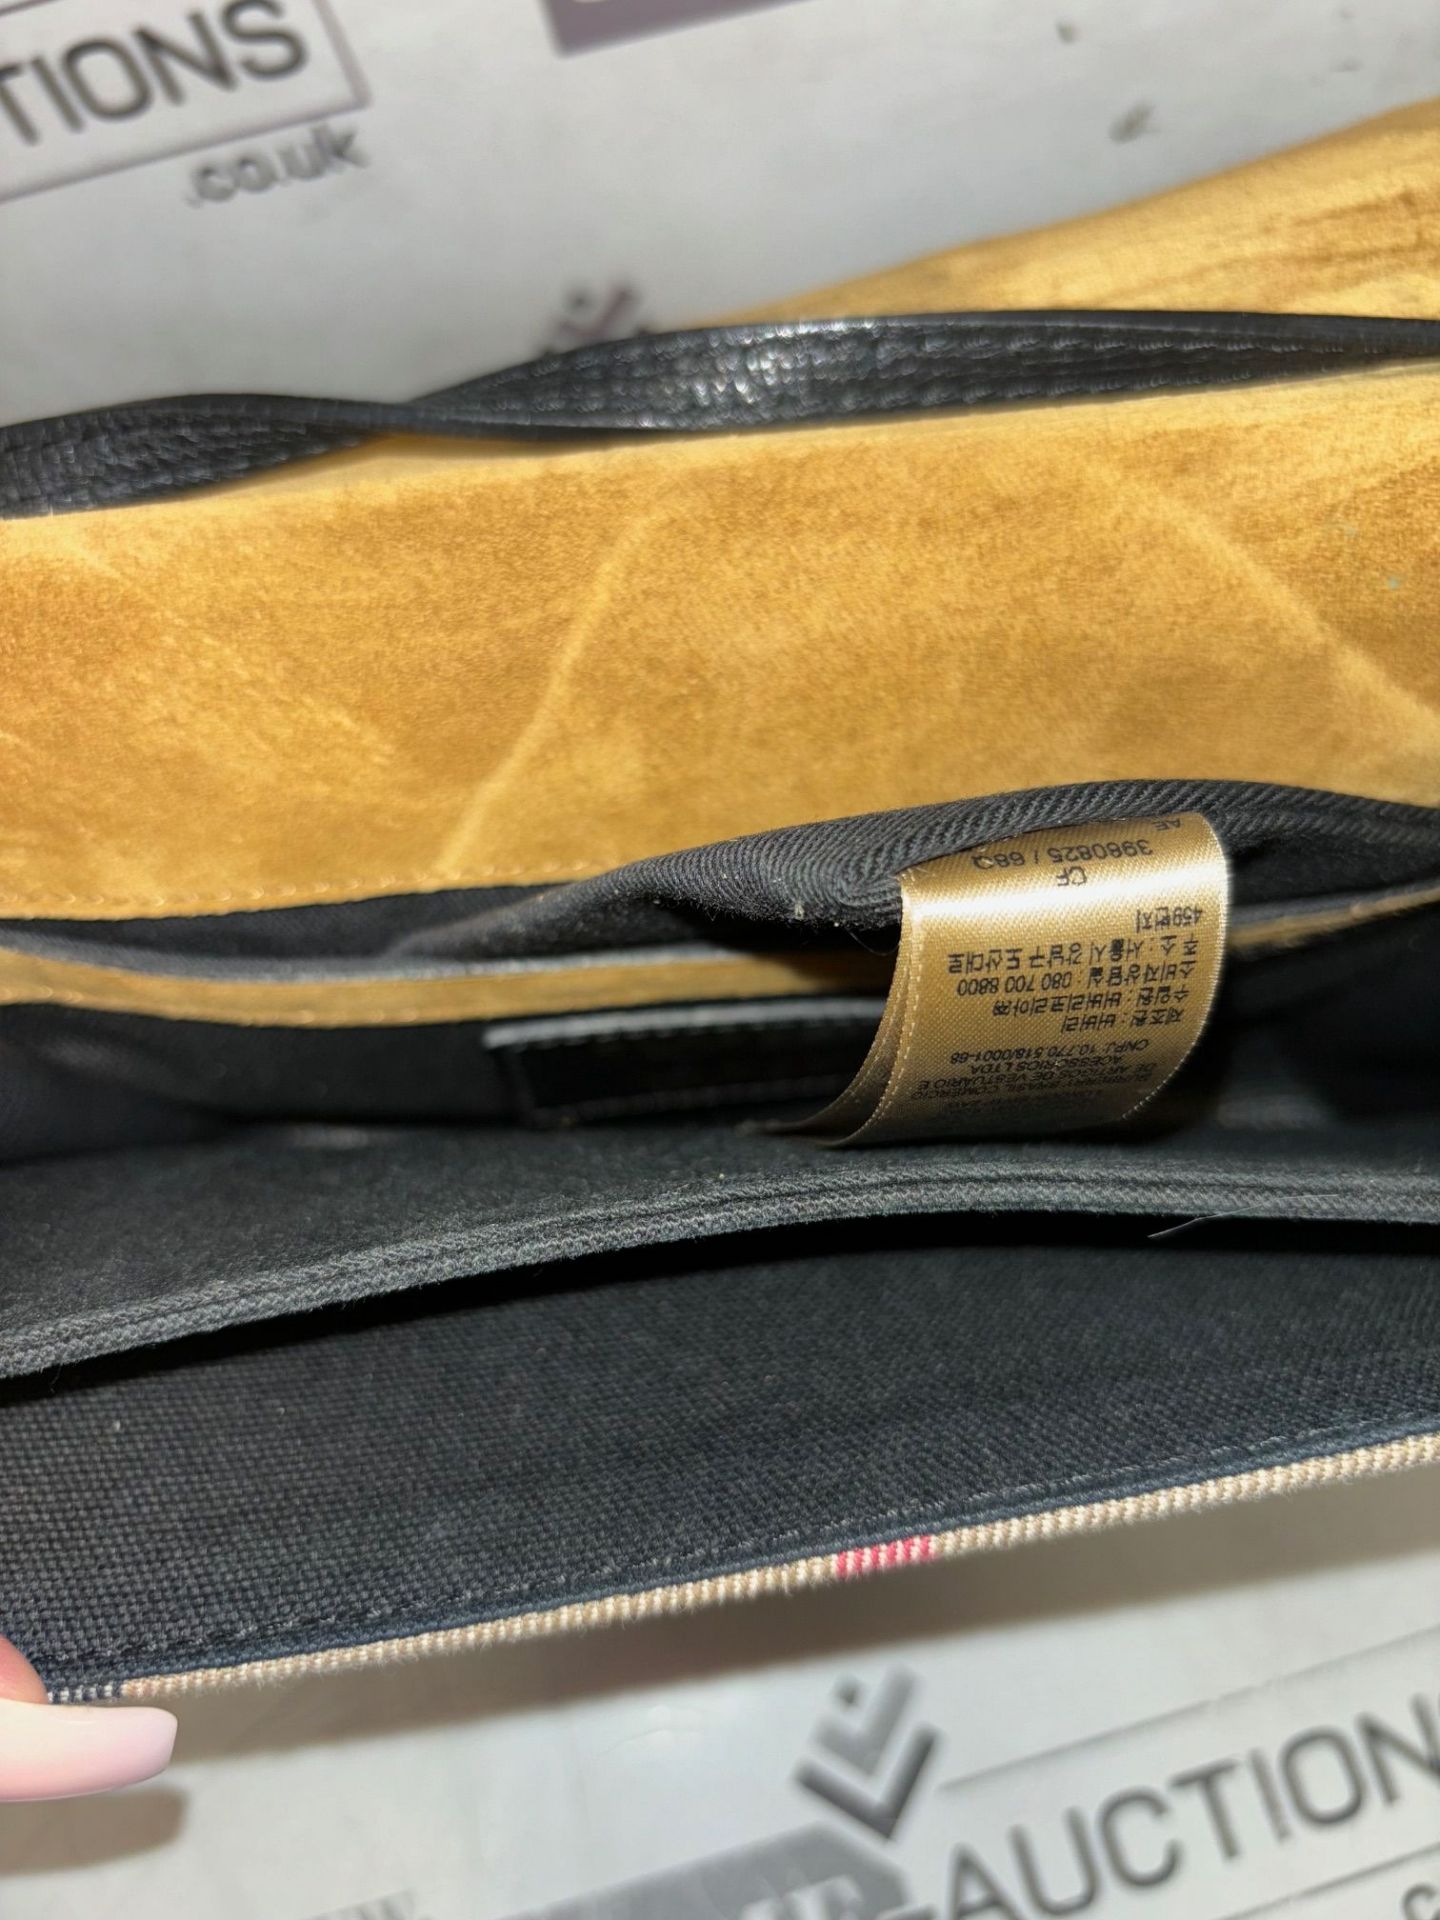 Genuine Burberry Macken Leather and House Check Crossbody Bag - Image 8 of 8